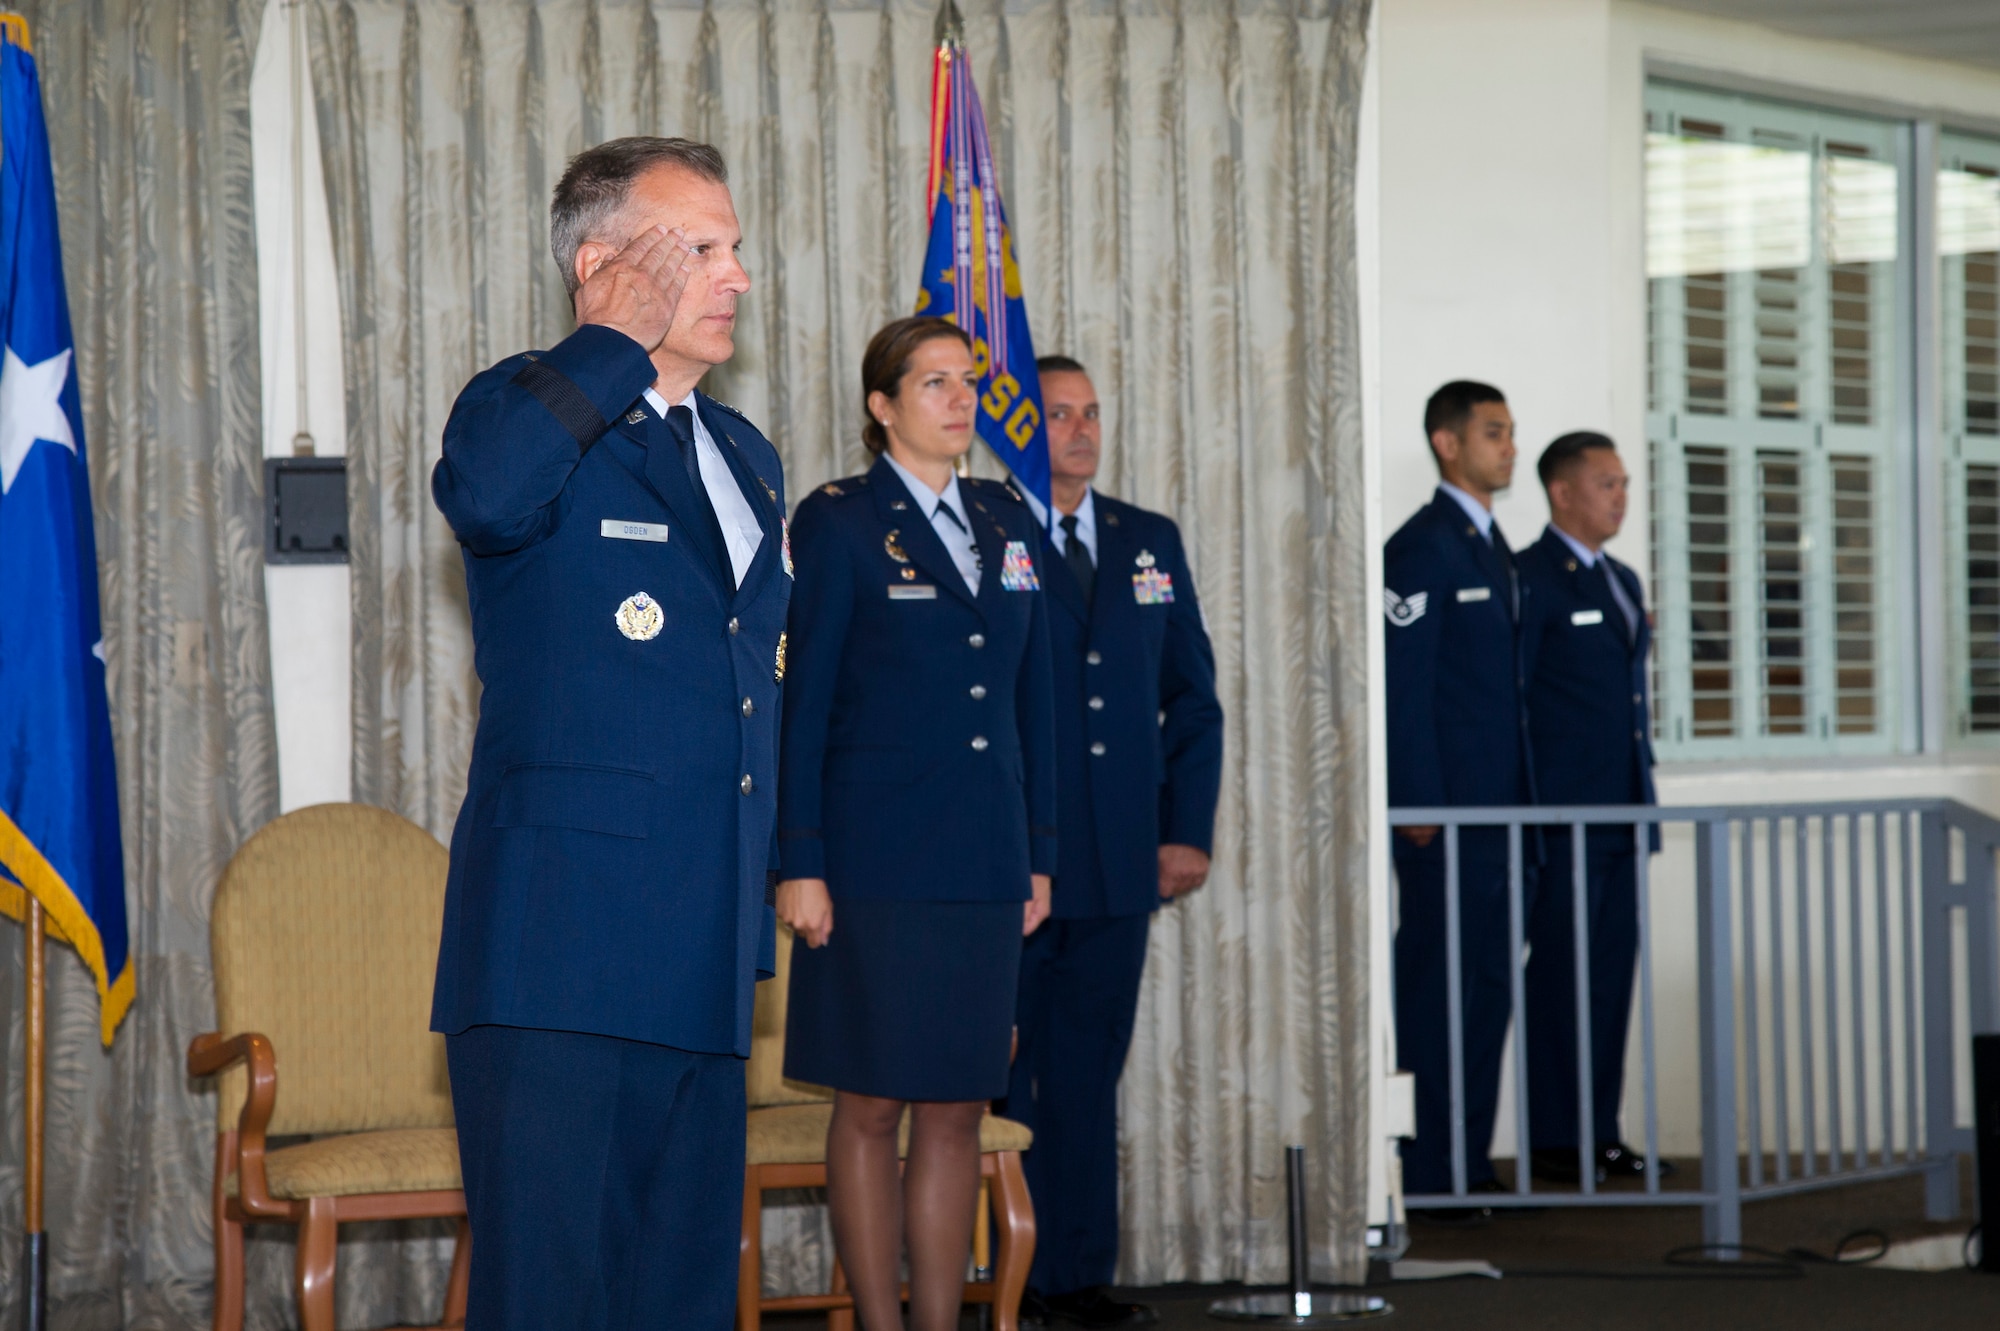 U.S. Air Force Maj. Gen. Randall Ogden, 4th Air Force commander, salutes Reserve Citizen Airmen from the 624th Regional Support Group during an assumption of command ceremony at Joint Base Pearl Harbor-Hickam, Hawaii, July 7, 2018.